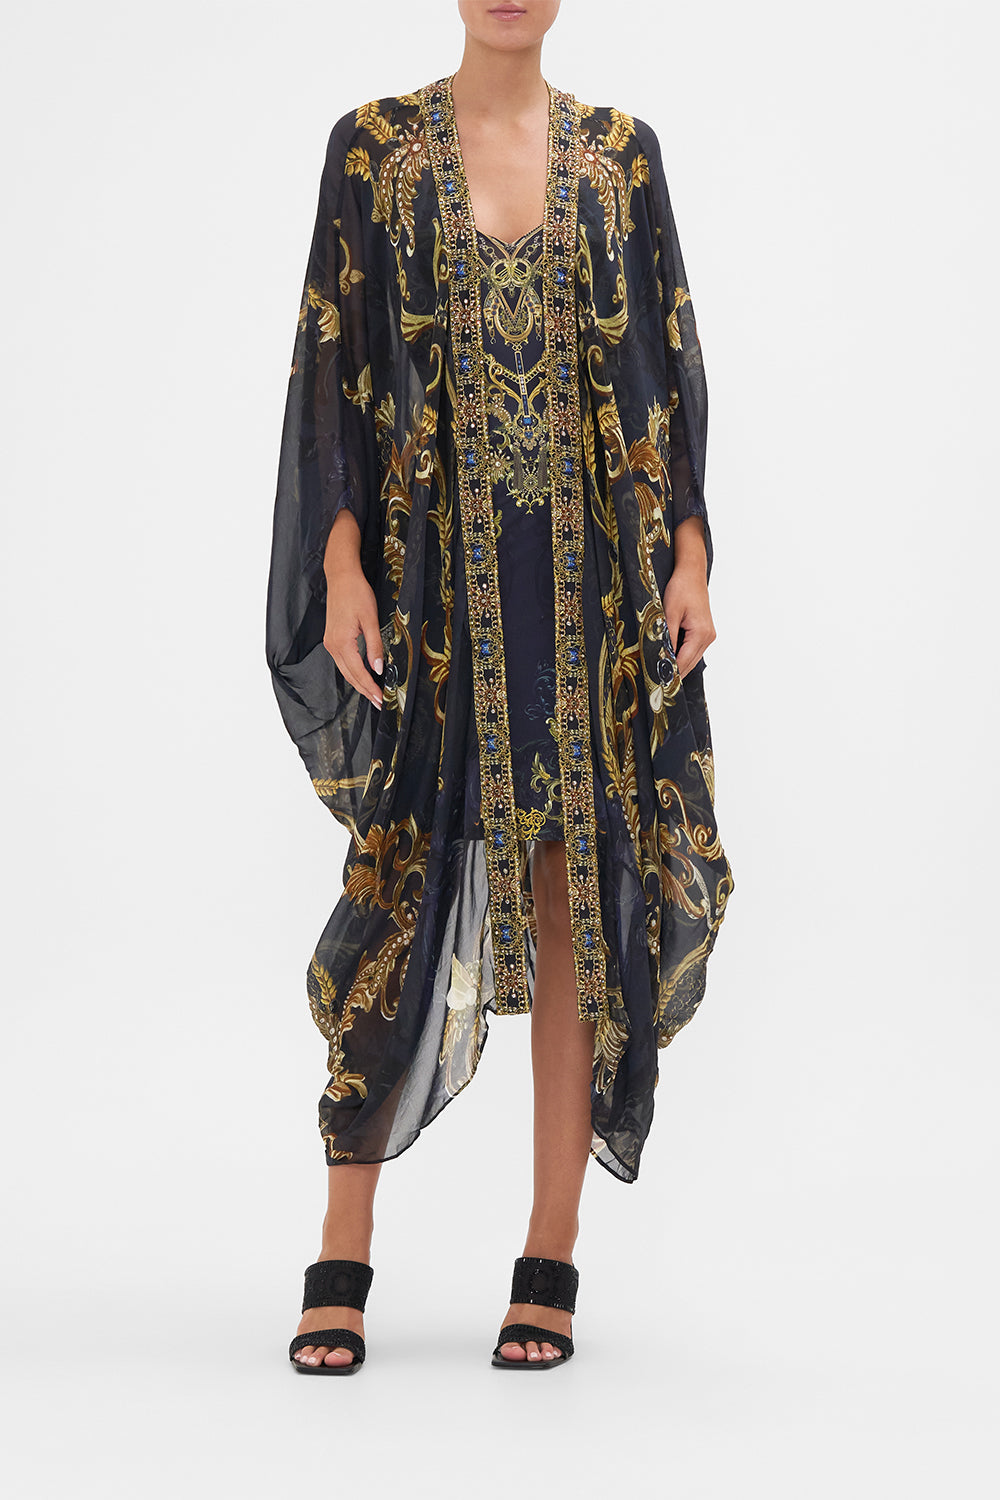 Front view of model wearing CAMILLA silk kimono in Moonlight Melodies print